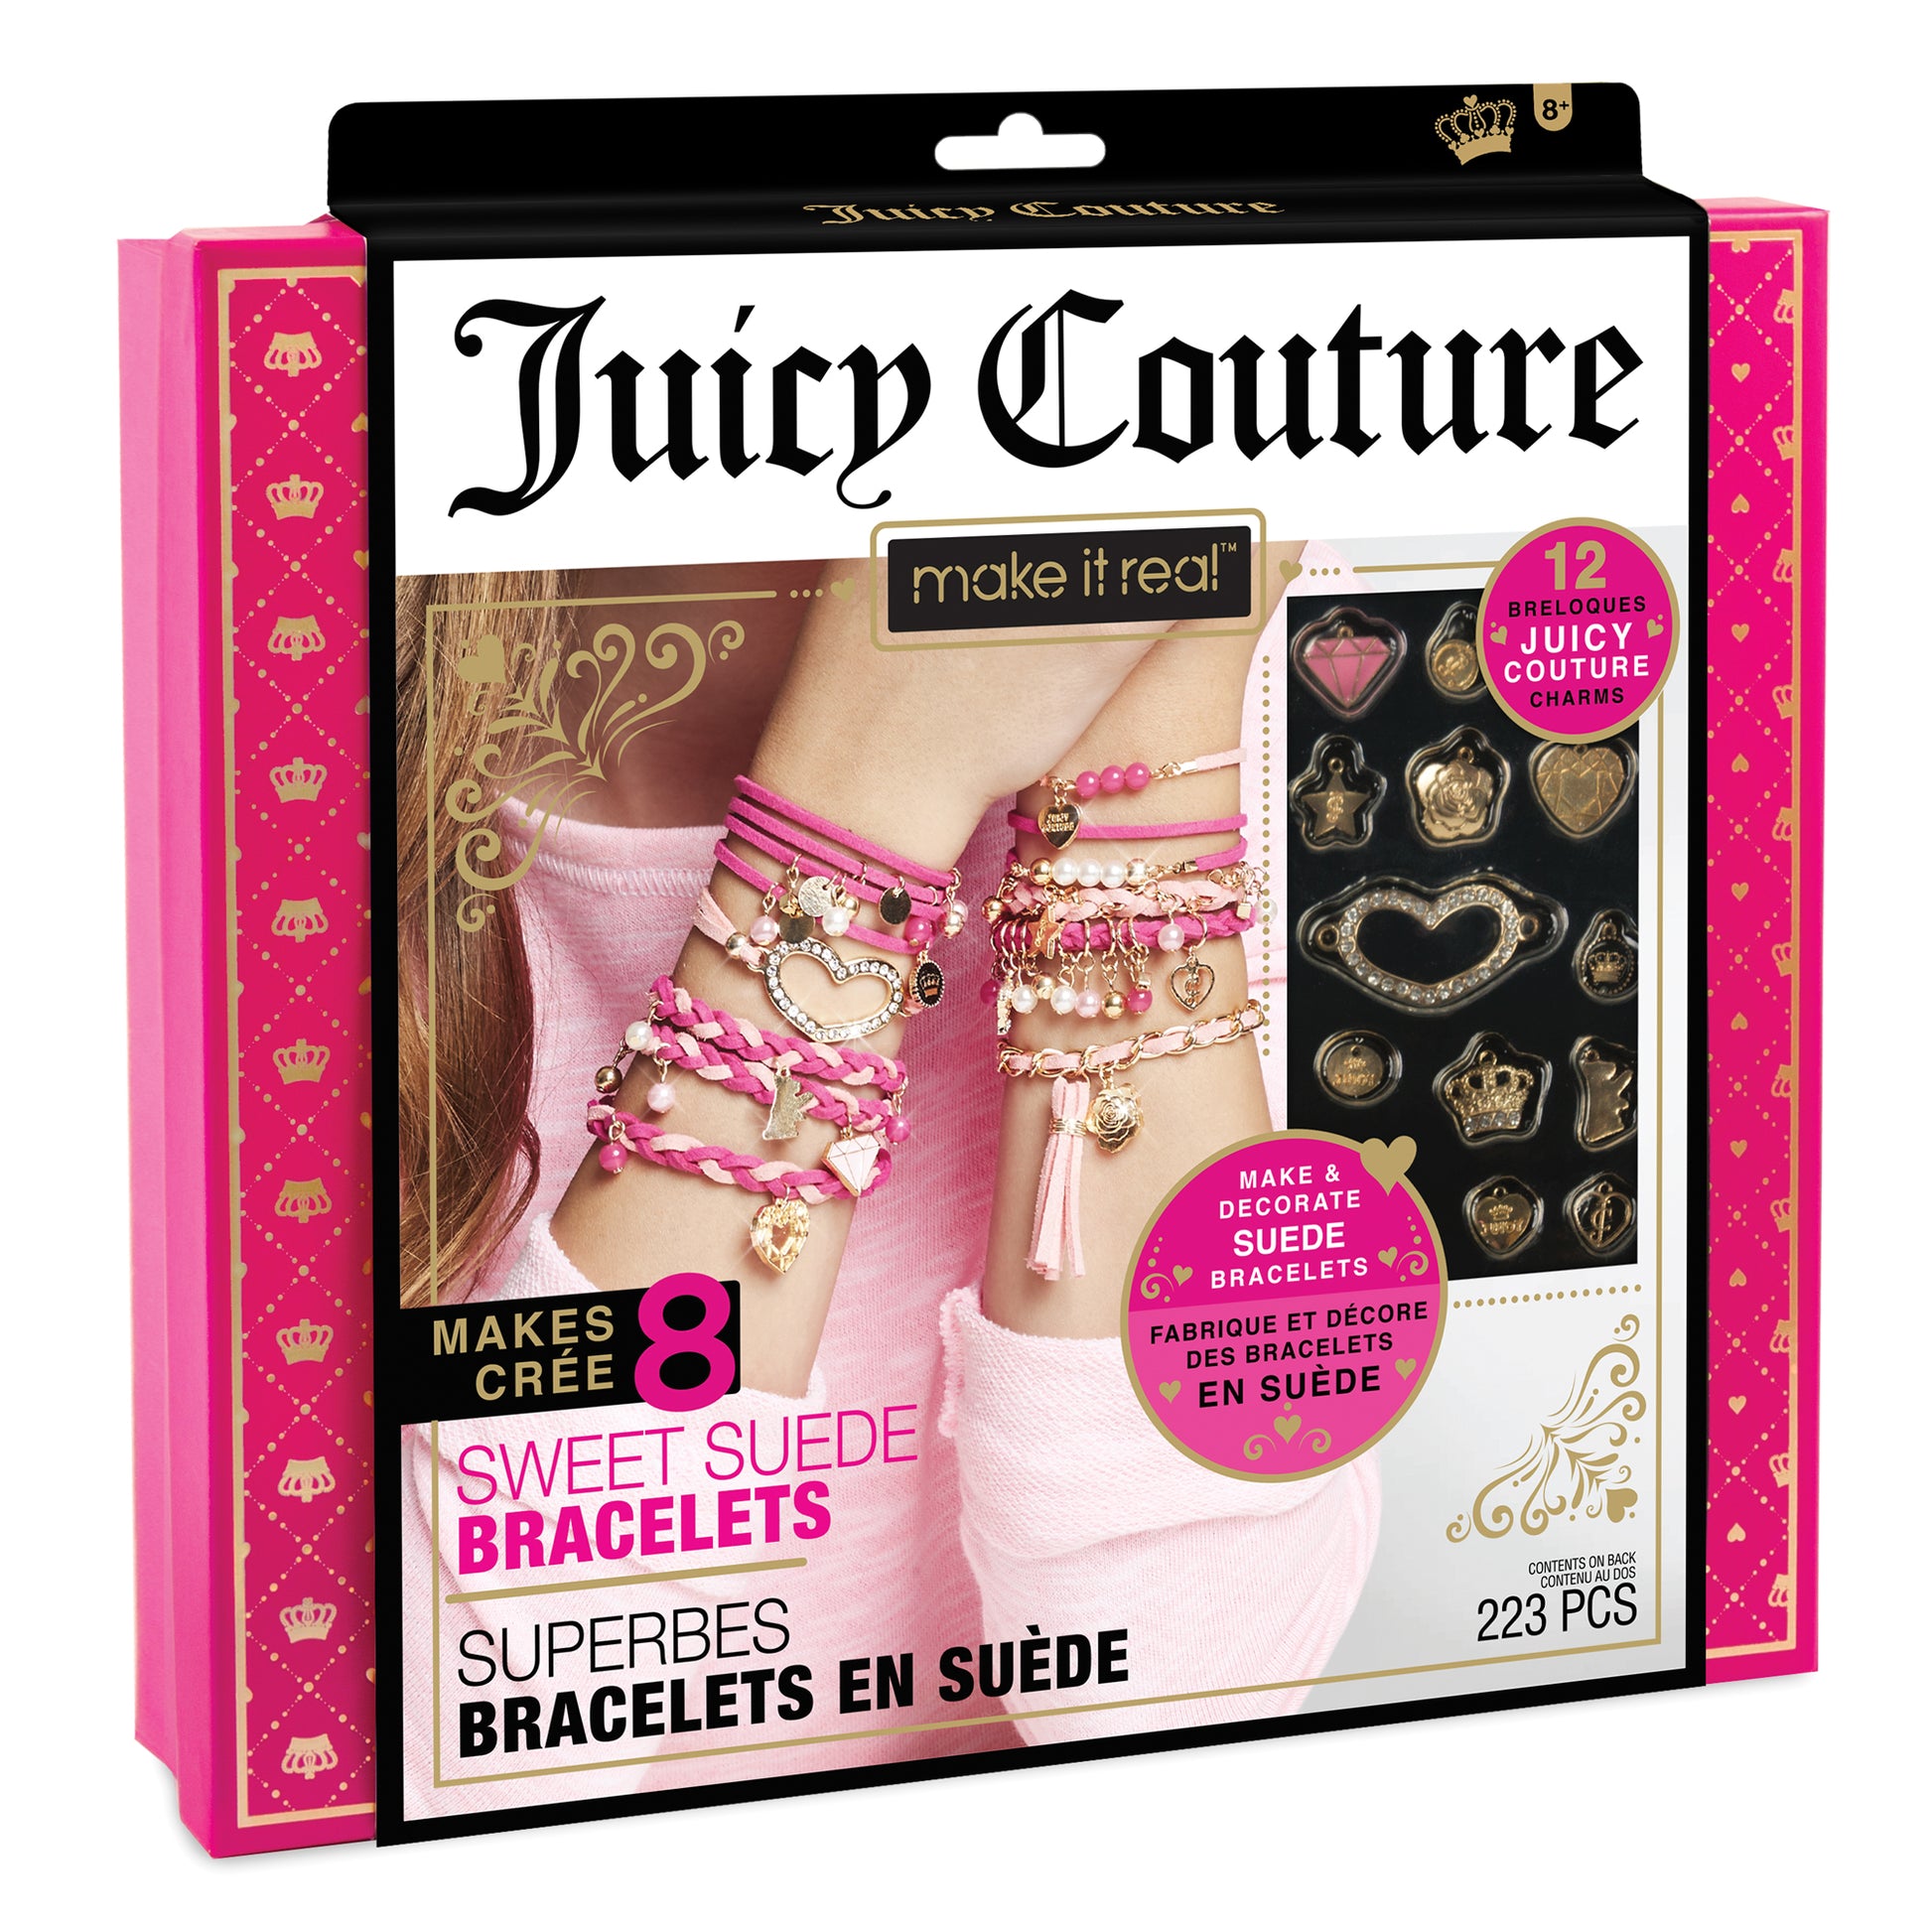 Make It Real Juicy Couture: 2 In 1 Crystal Bracelet Charms Kit